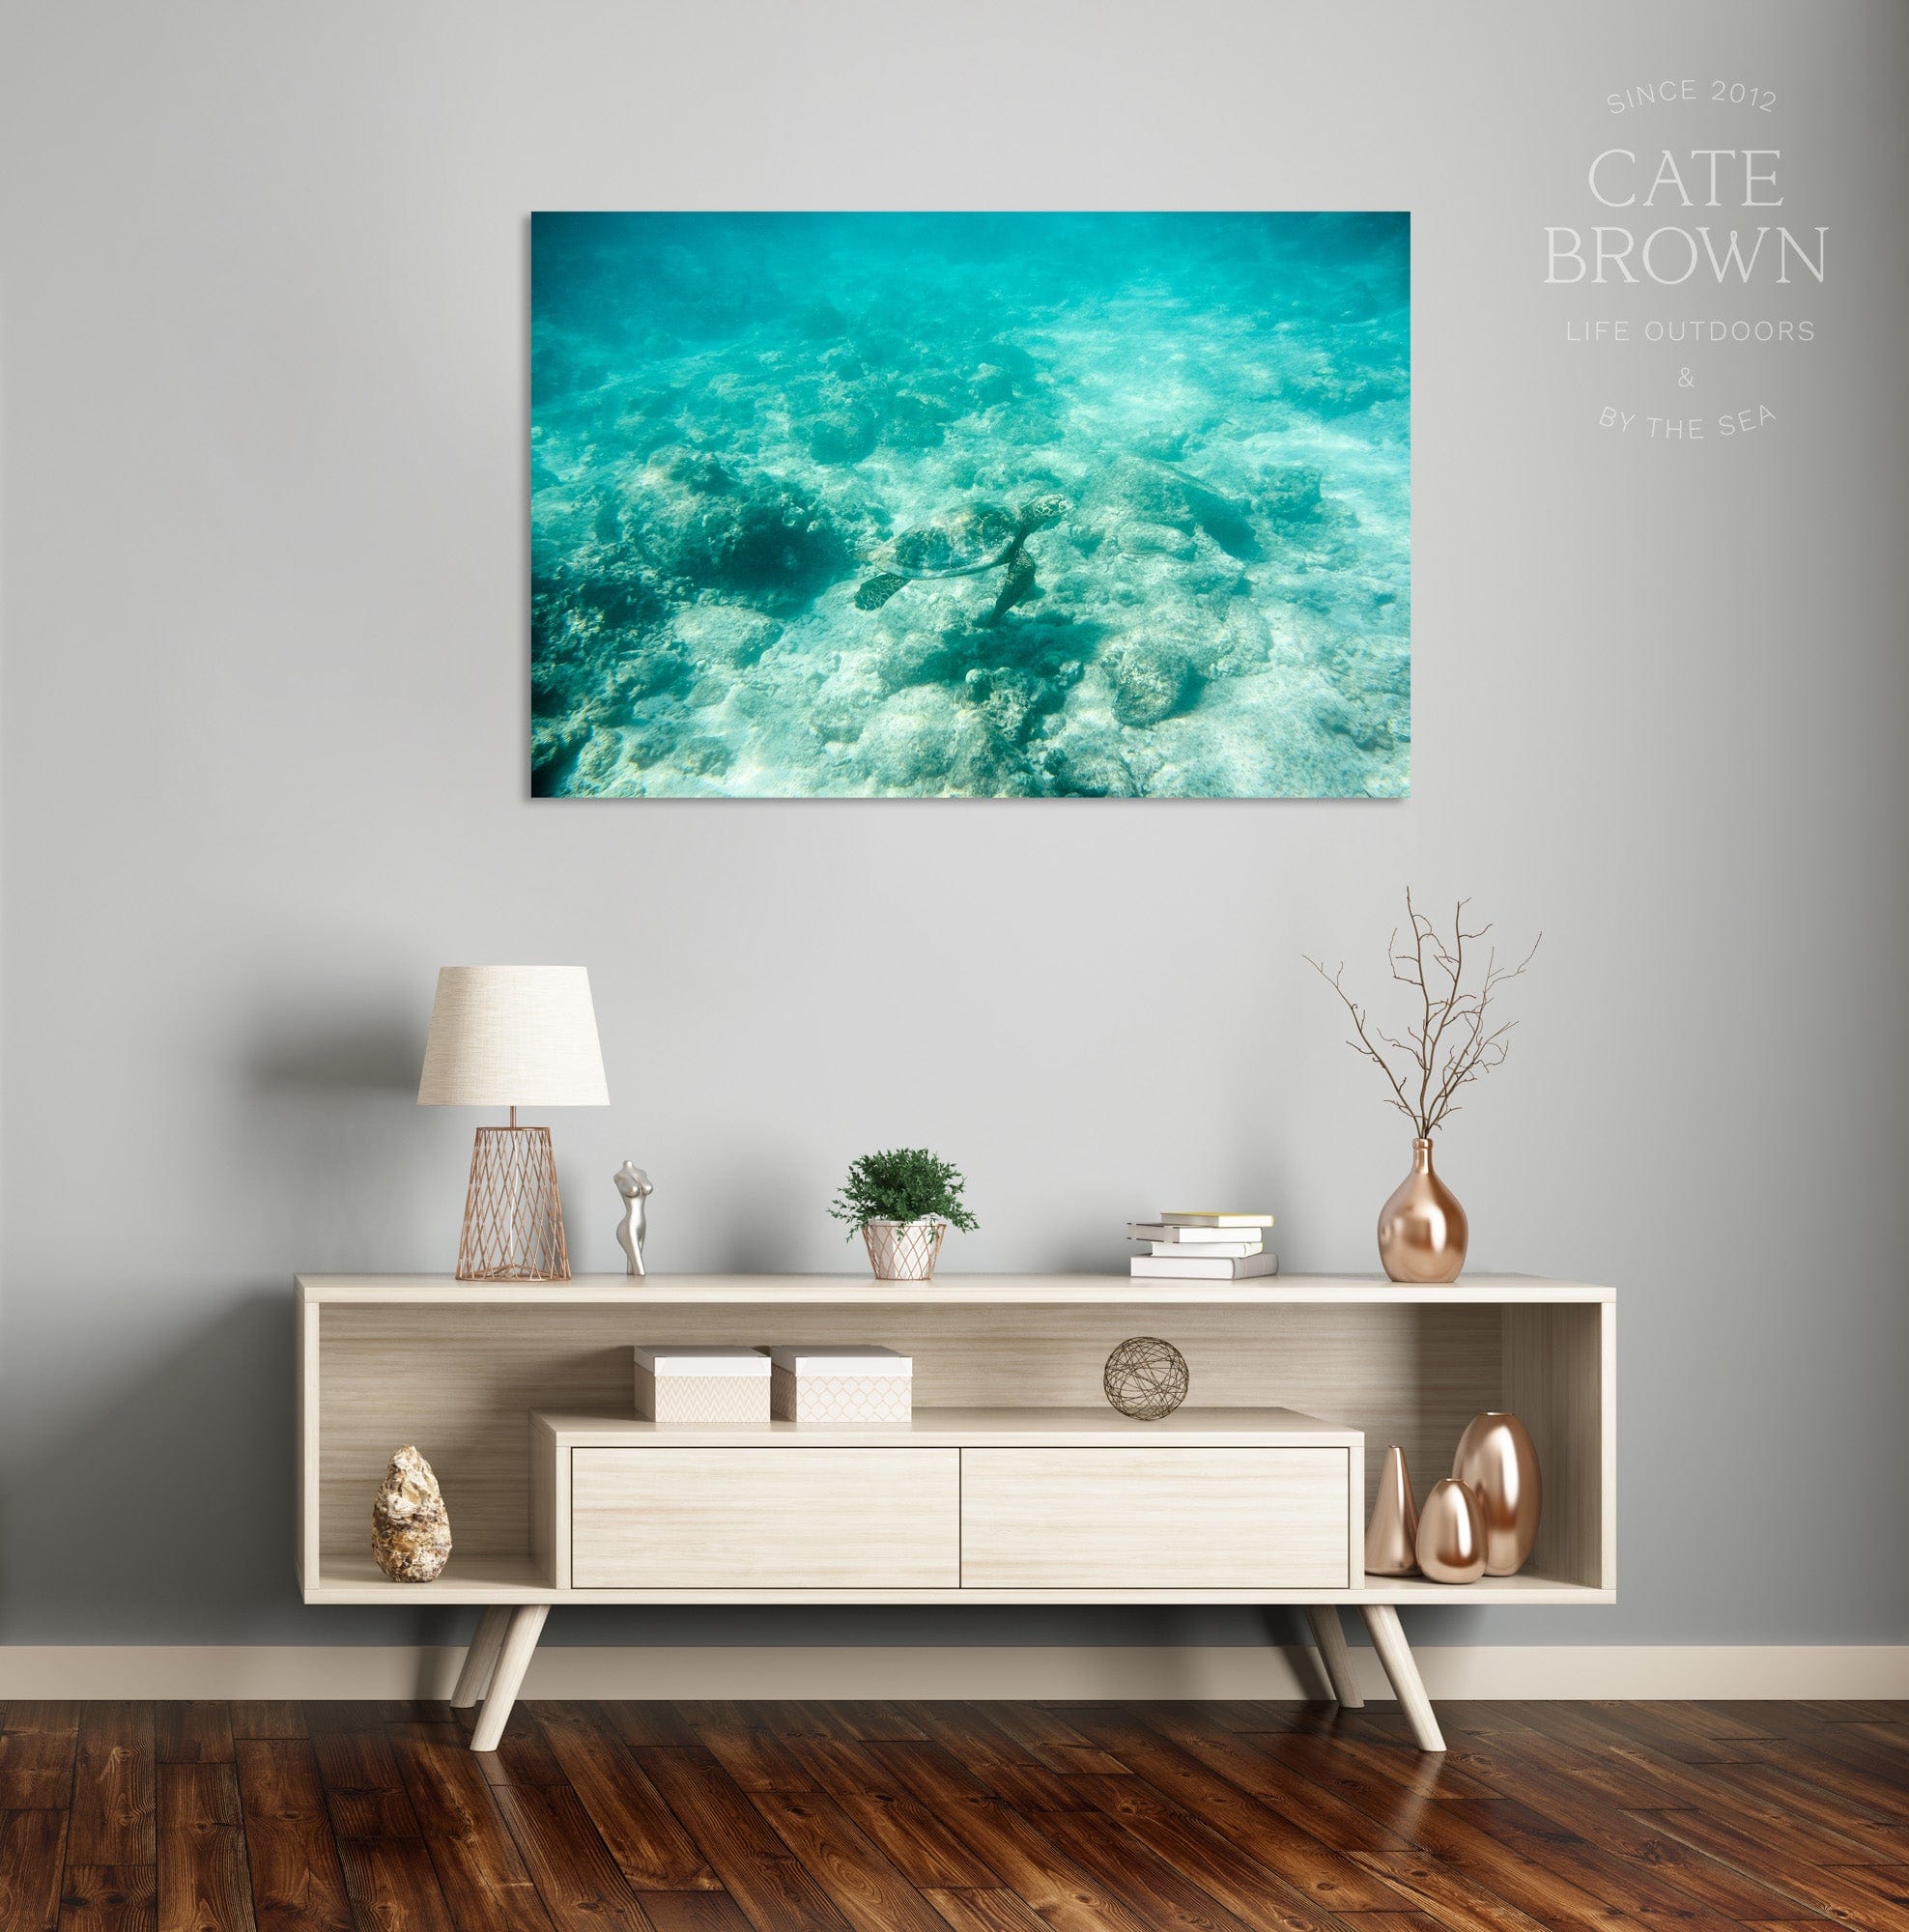 Cate Brown Photo Canvas / 16"x24" / None (Print Only) Seafaring Friends  //  Ocean Photography Made to Order Ocean Fine Art